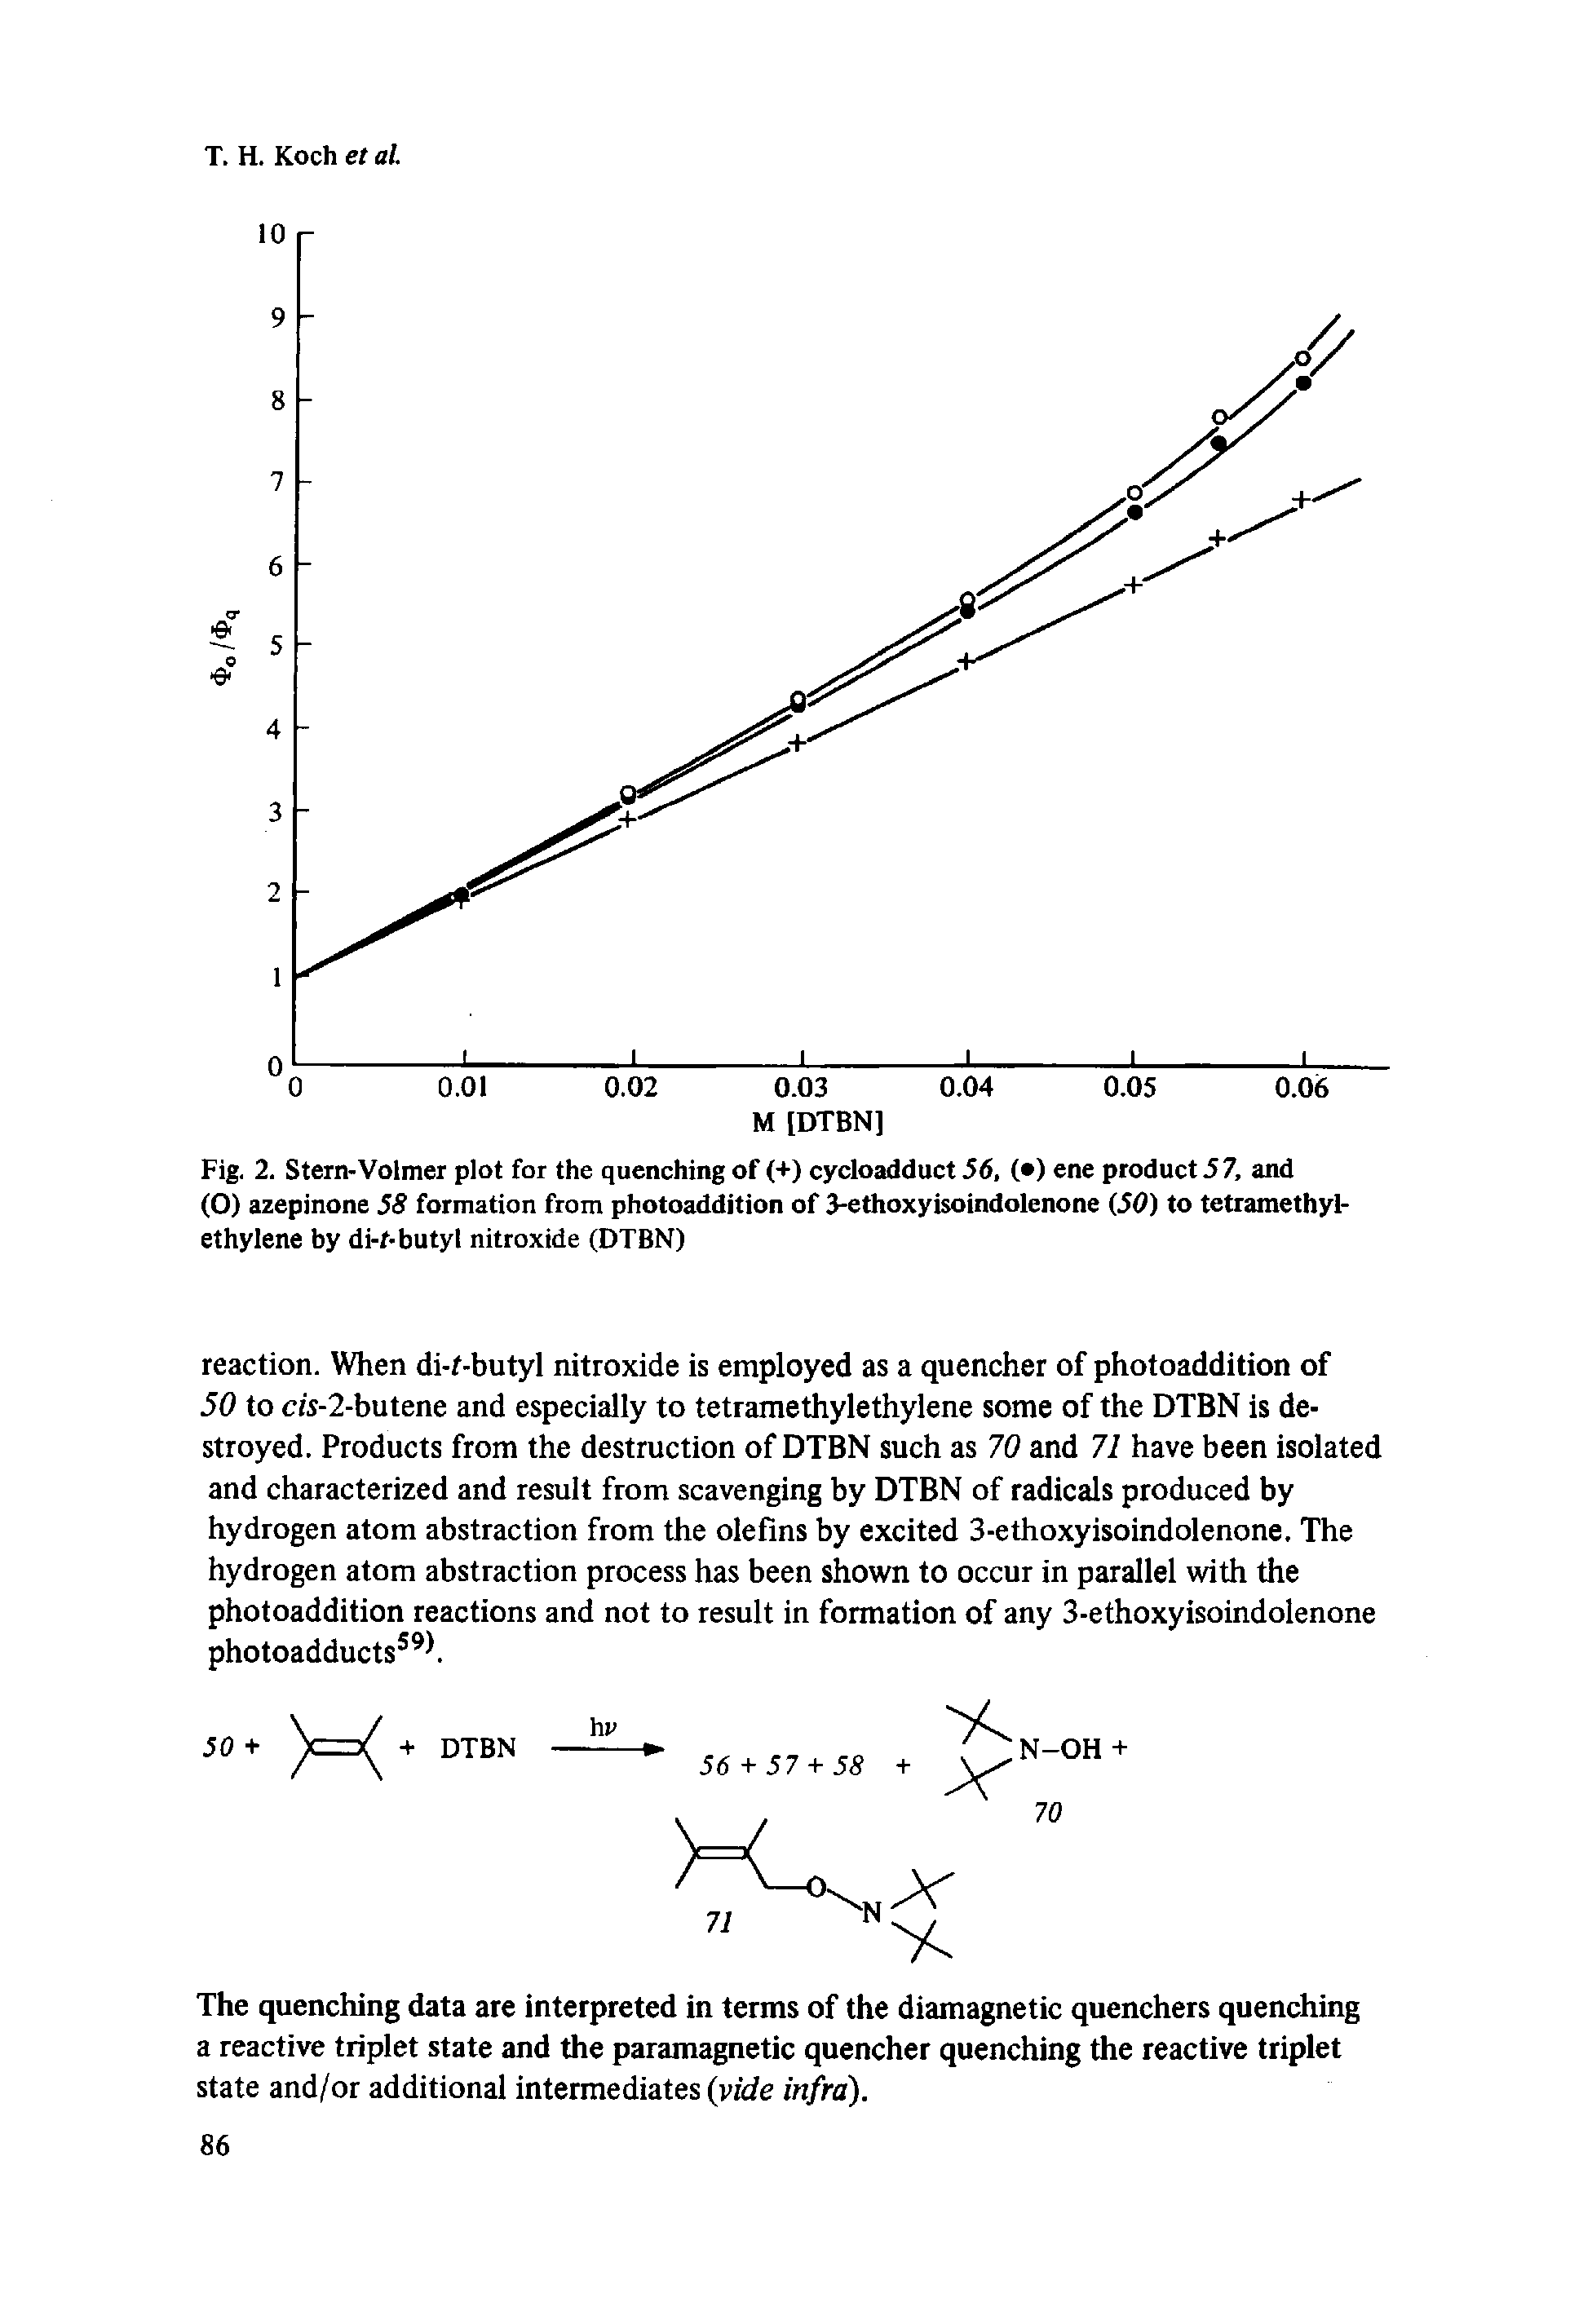 Fig. 2. Stern-Volmer plot for the quenching of (+) cycloadduct 56, ( ) ene product 5 7, and (0) azepinone 58 formation from photoaddition of 3-ethoxy isoindolenone (50) to tetramethyl-ethylene by di-f- butyl nitroxide (DTBN)...